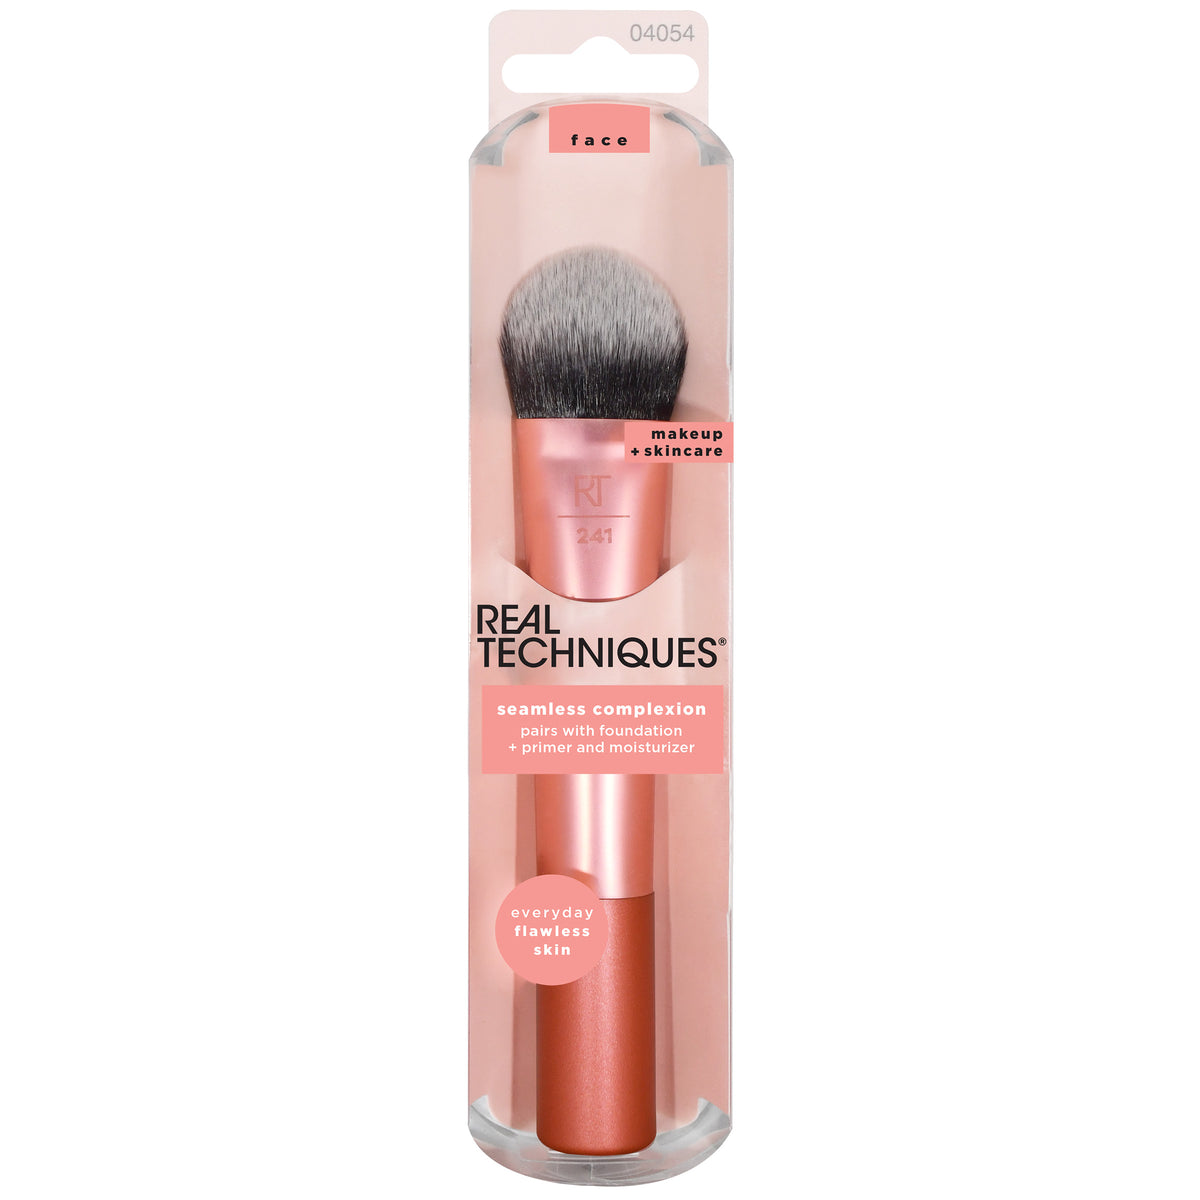 Real Techniques Seamless Complexion Brush, Perfect For Makeup or Skincare, For Foundation, Serum, Primer, and Moisturizer Application, Orange Face Brush, 1 Count